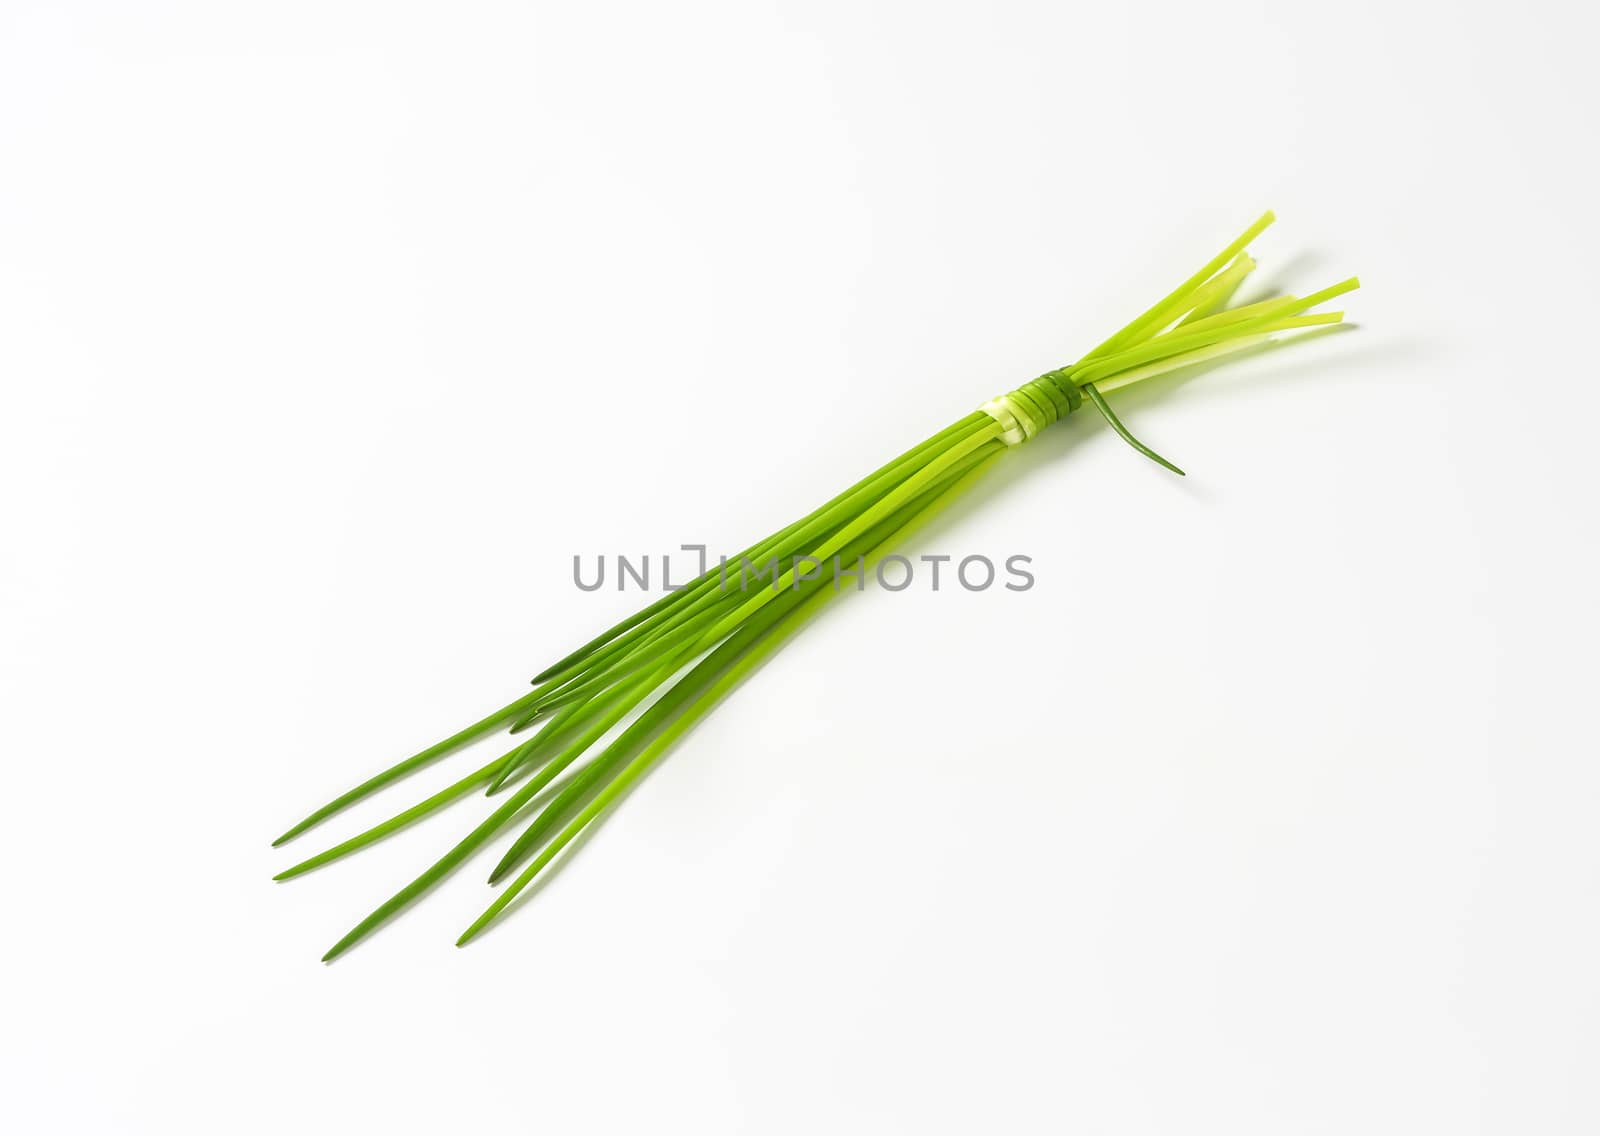 Fresh chives leaves on white background